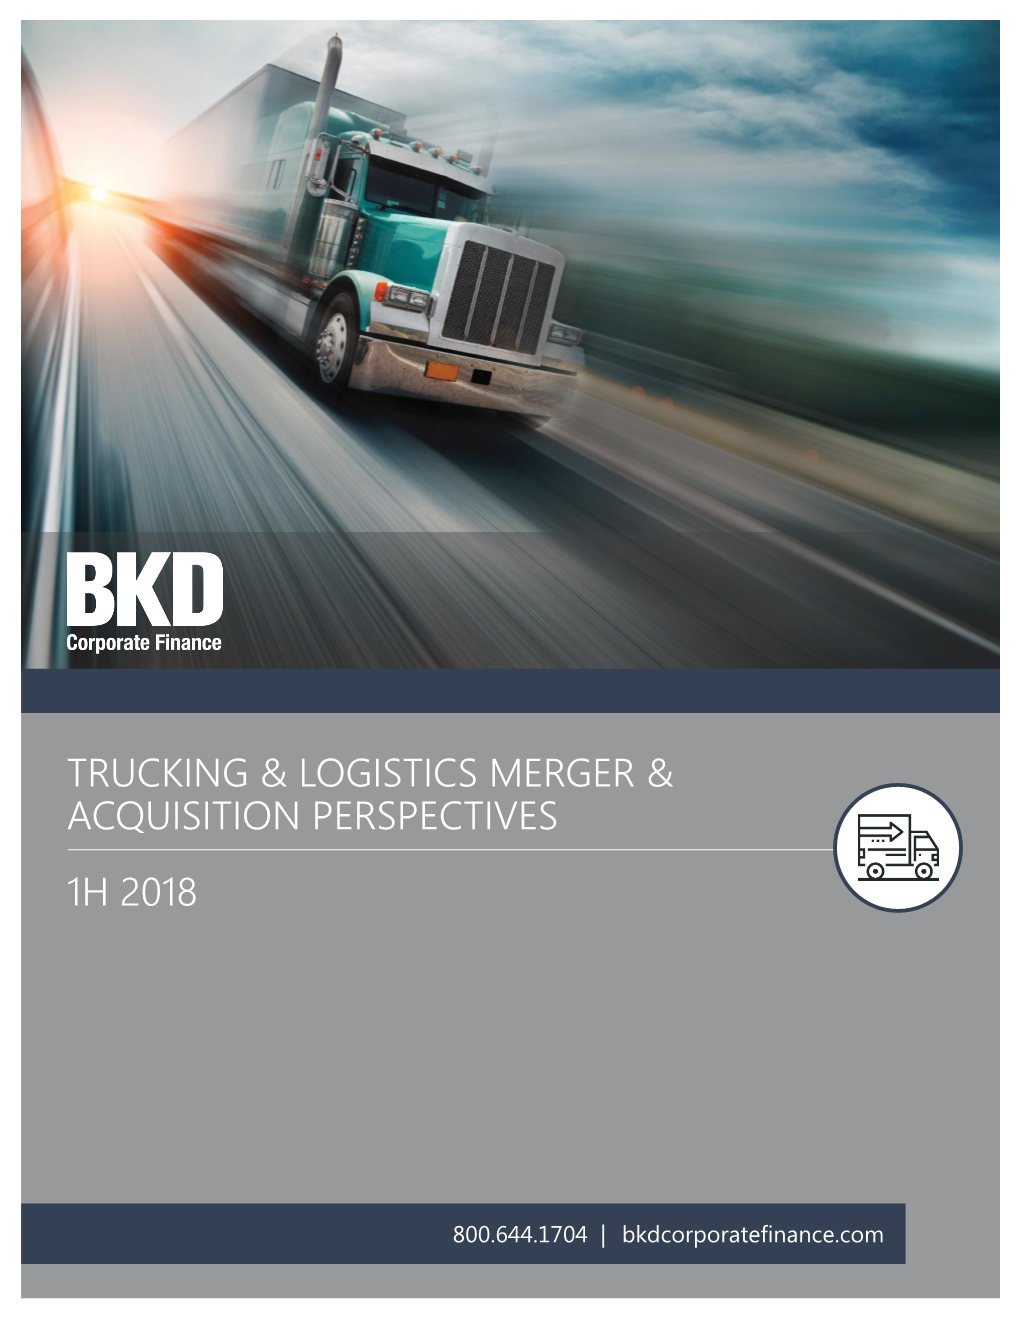 Trucking & Logistics Merger & Acquisition Perspectives 1H 2018